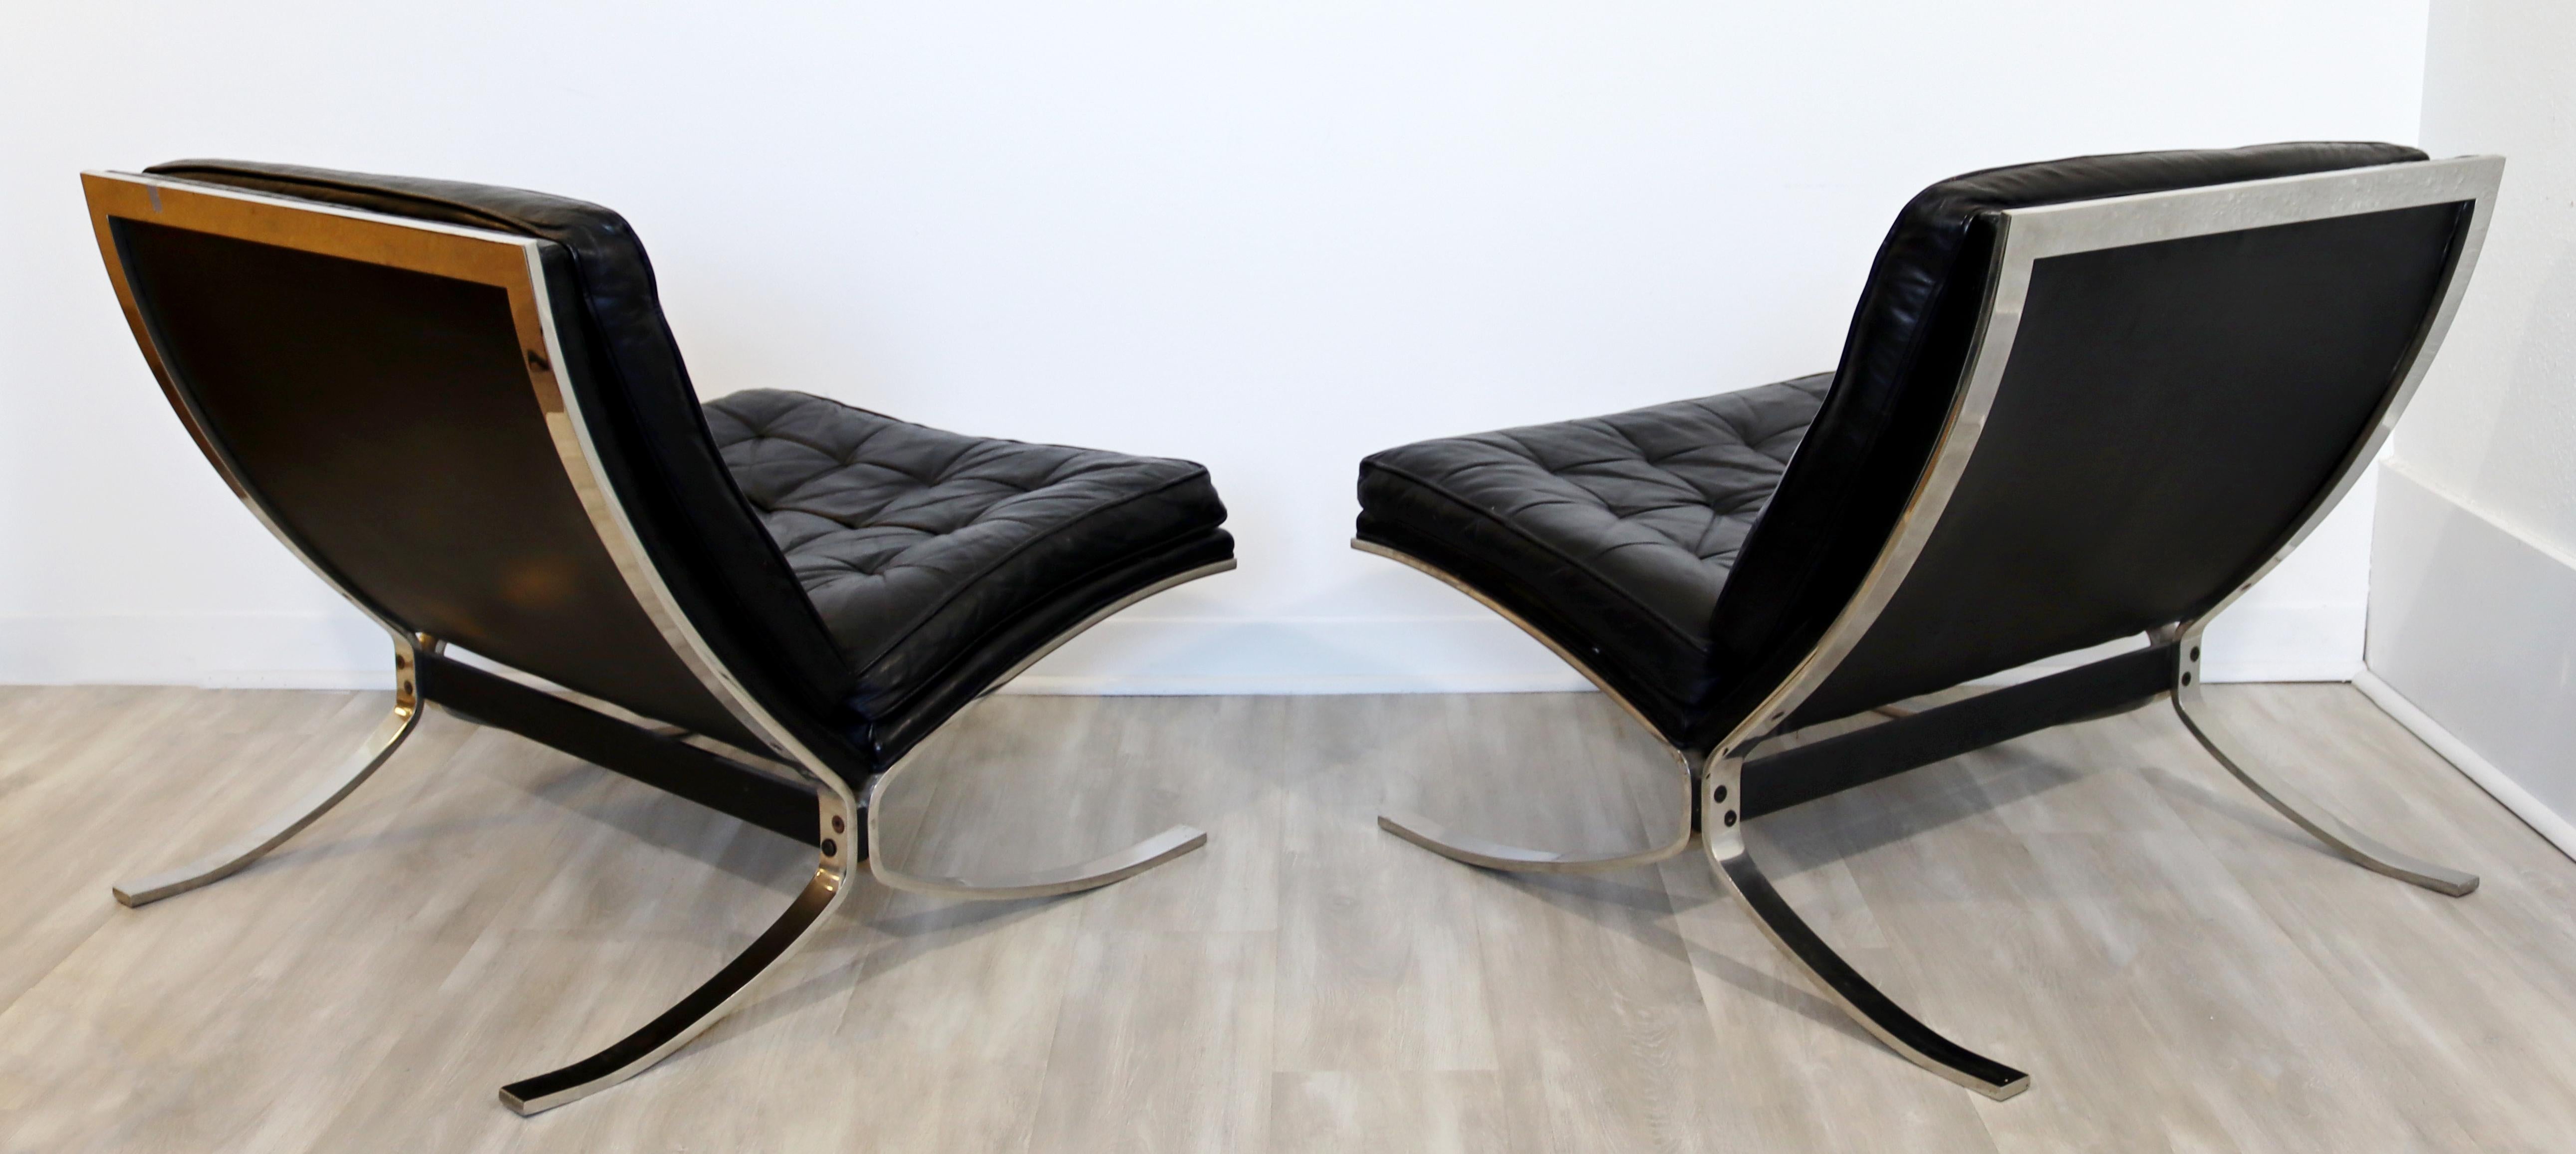 Leather Mid-Century Modern Barcelona Pair of Lounge Chairs Mies Van der Rohe Style 1970s